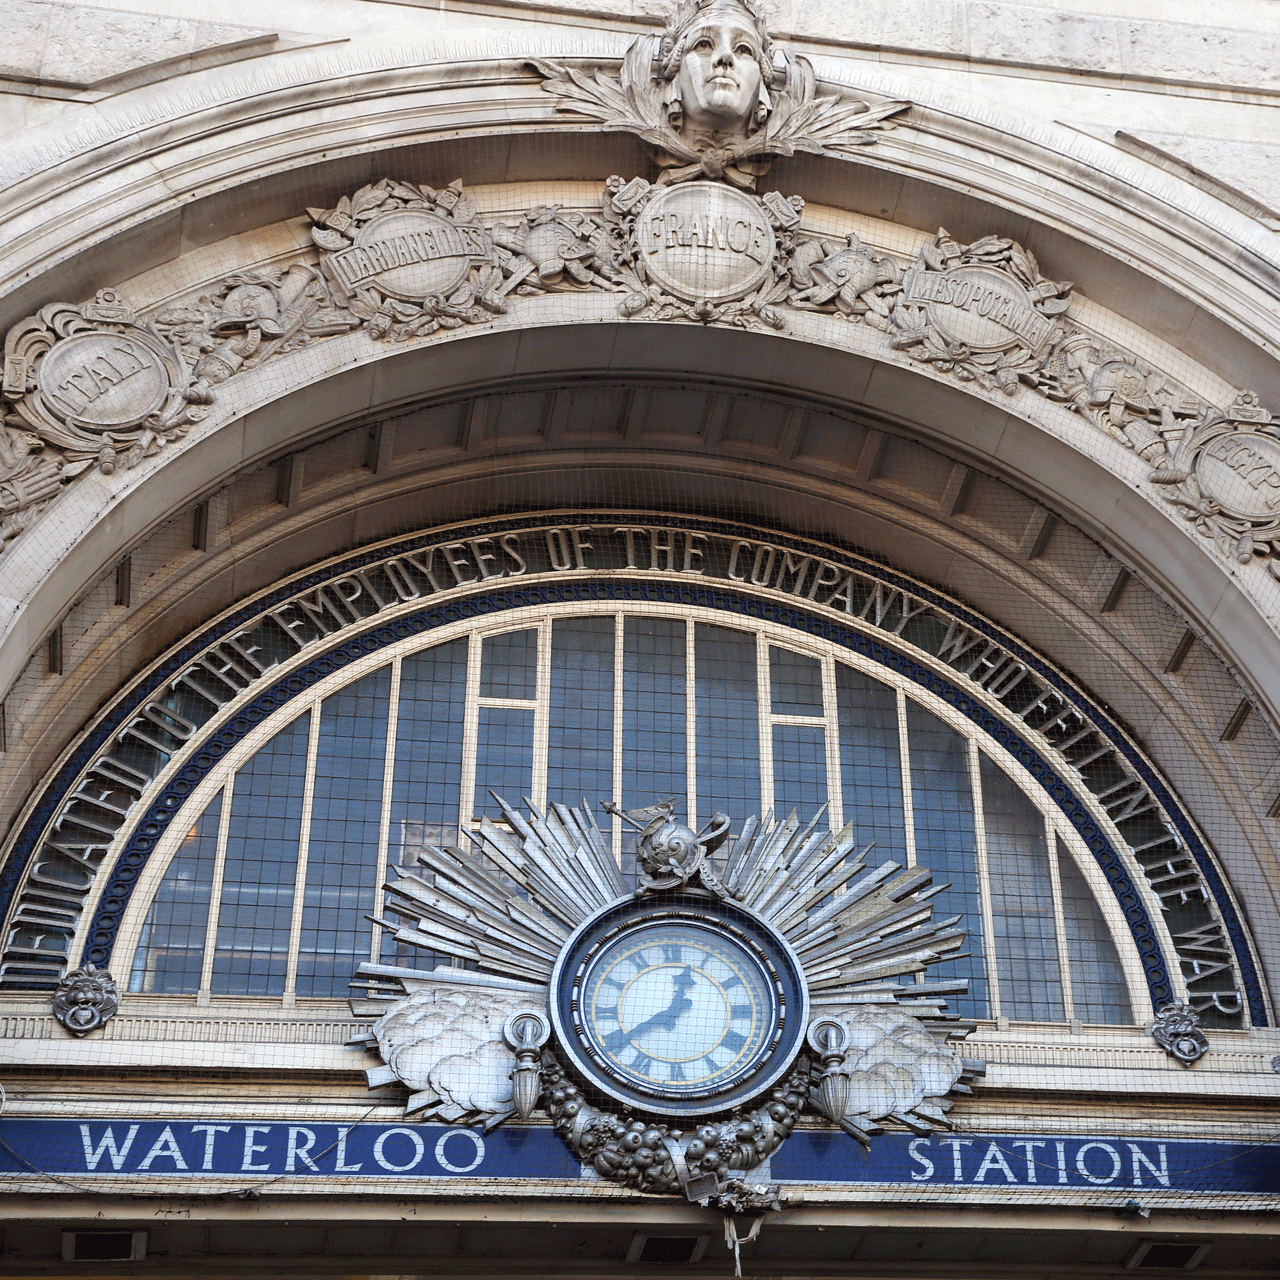 https://www.thetoolroom.co.uk/wp-content/uploads/2016/10/NTR-projects-waterloo-4.png